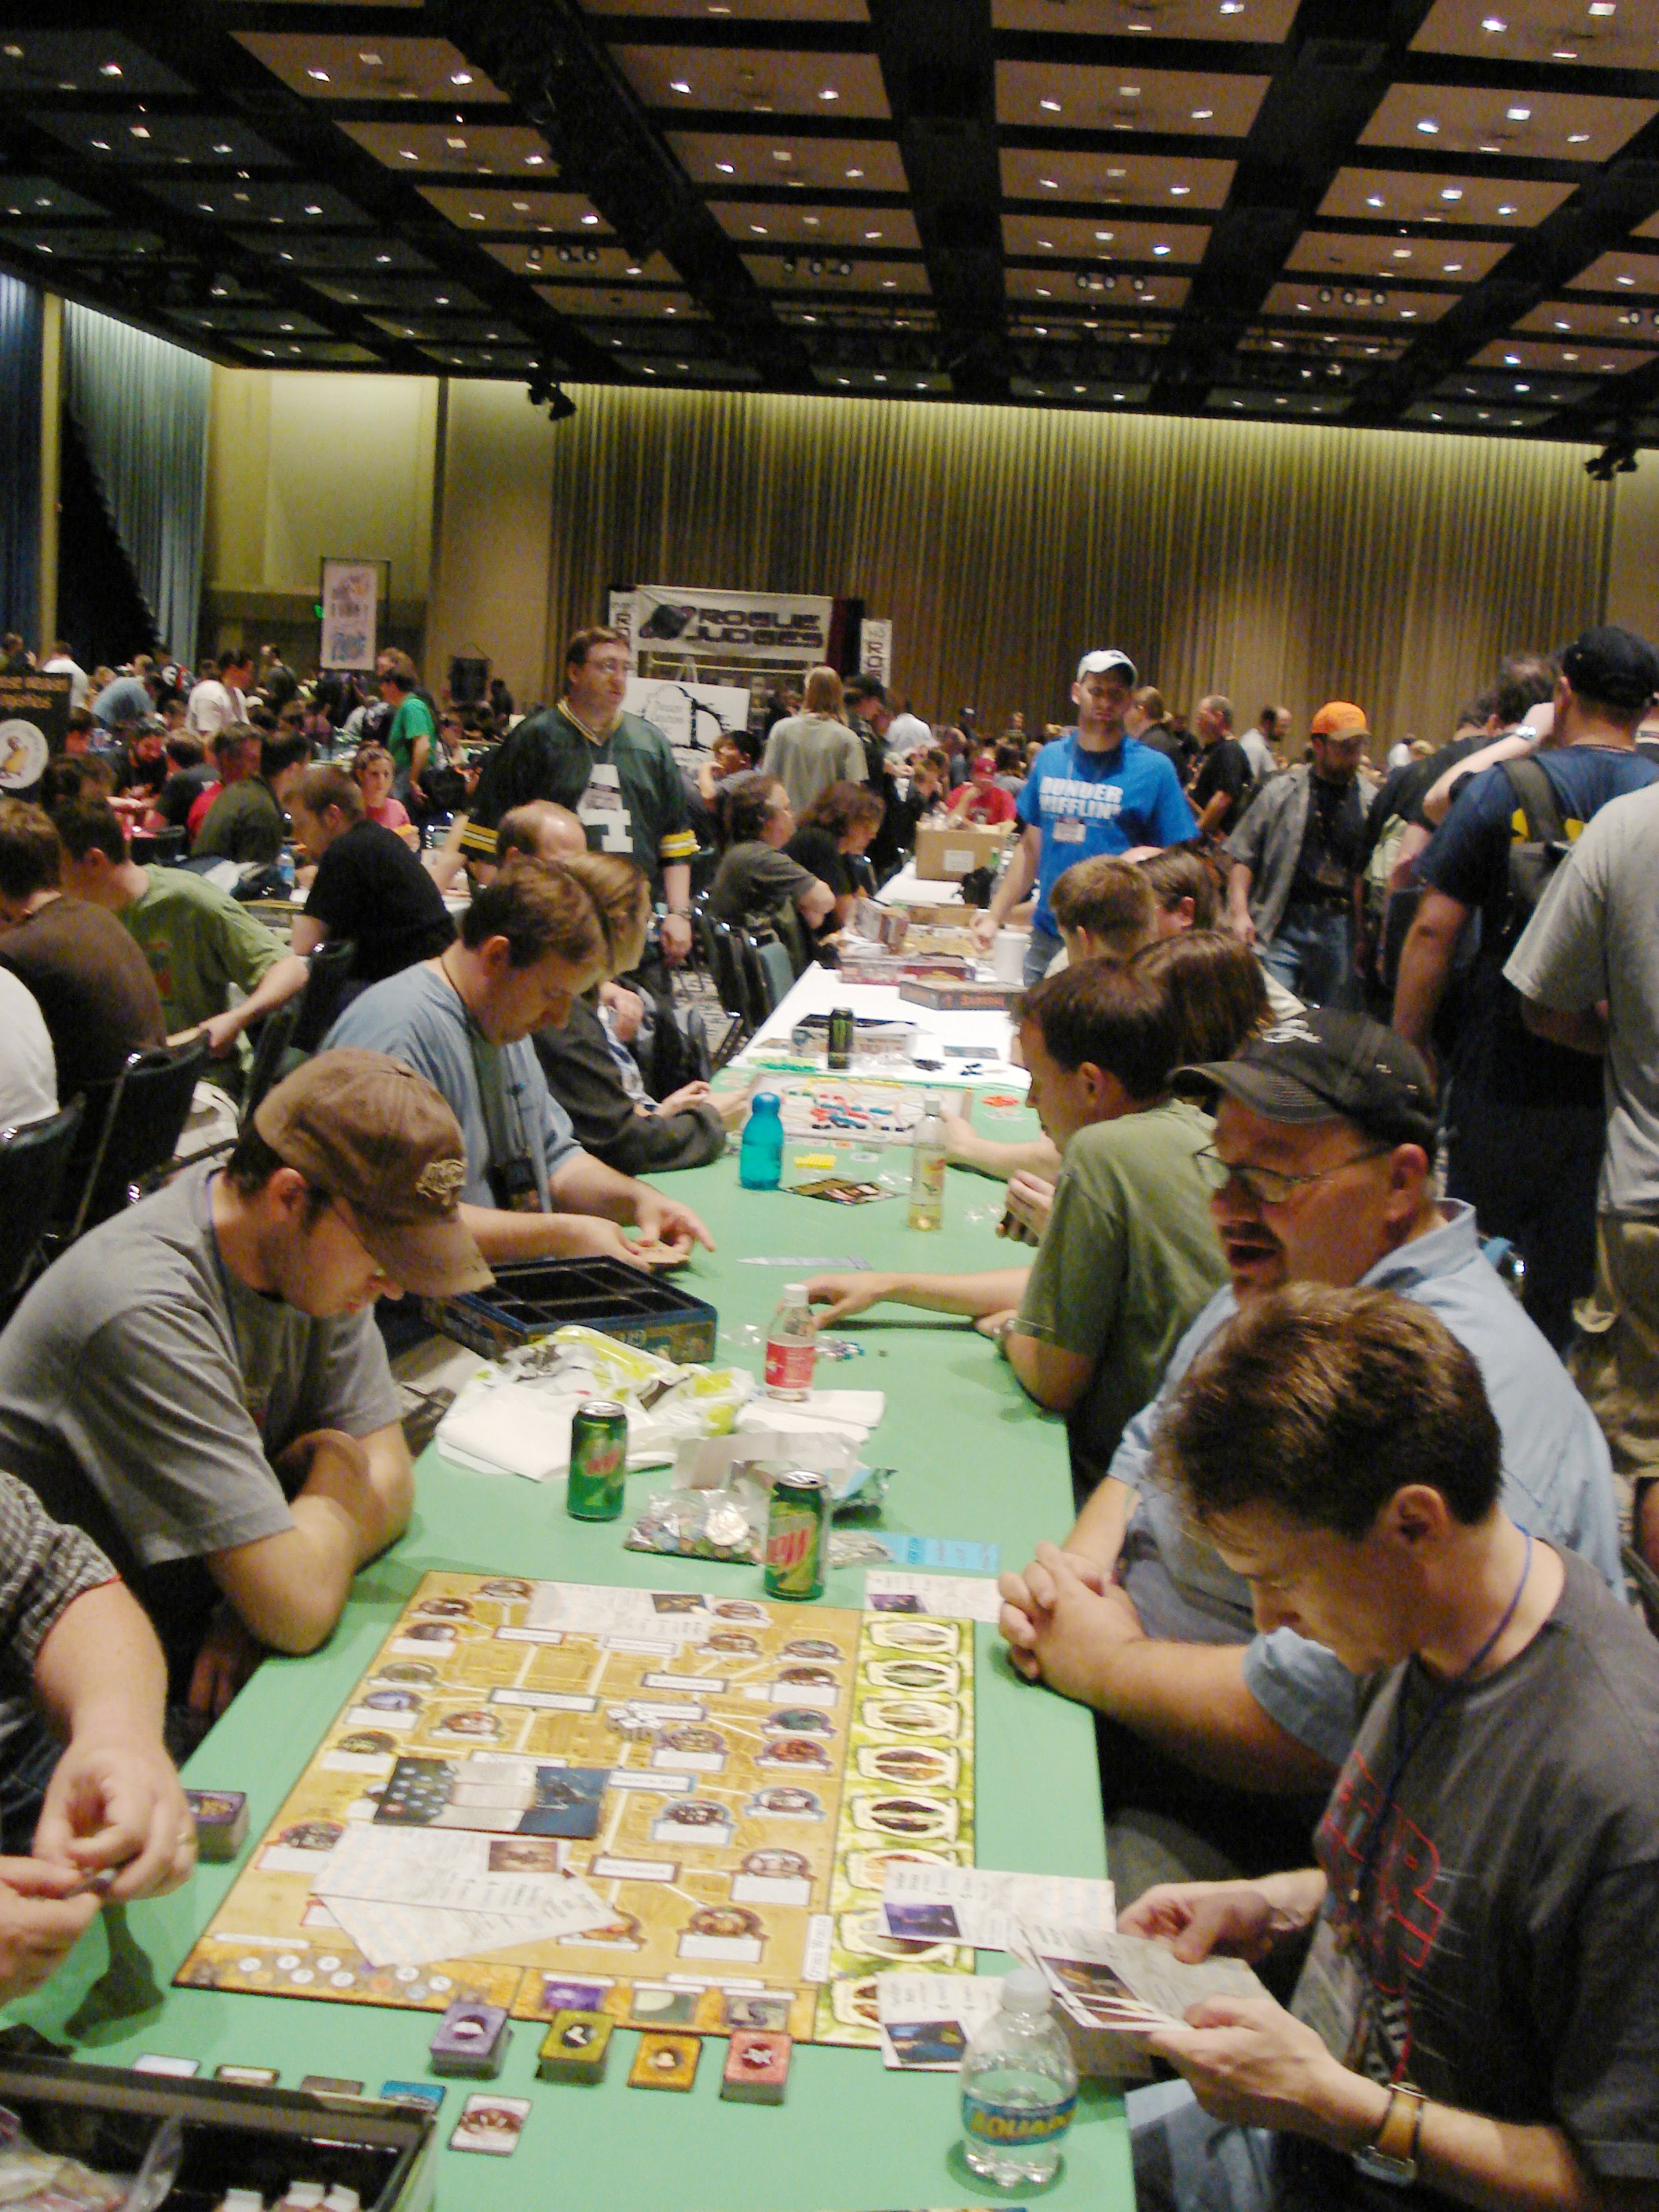 The board games area full of gamers